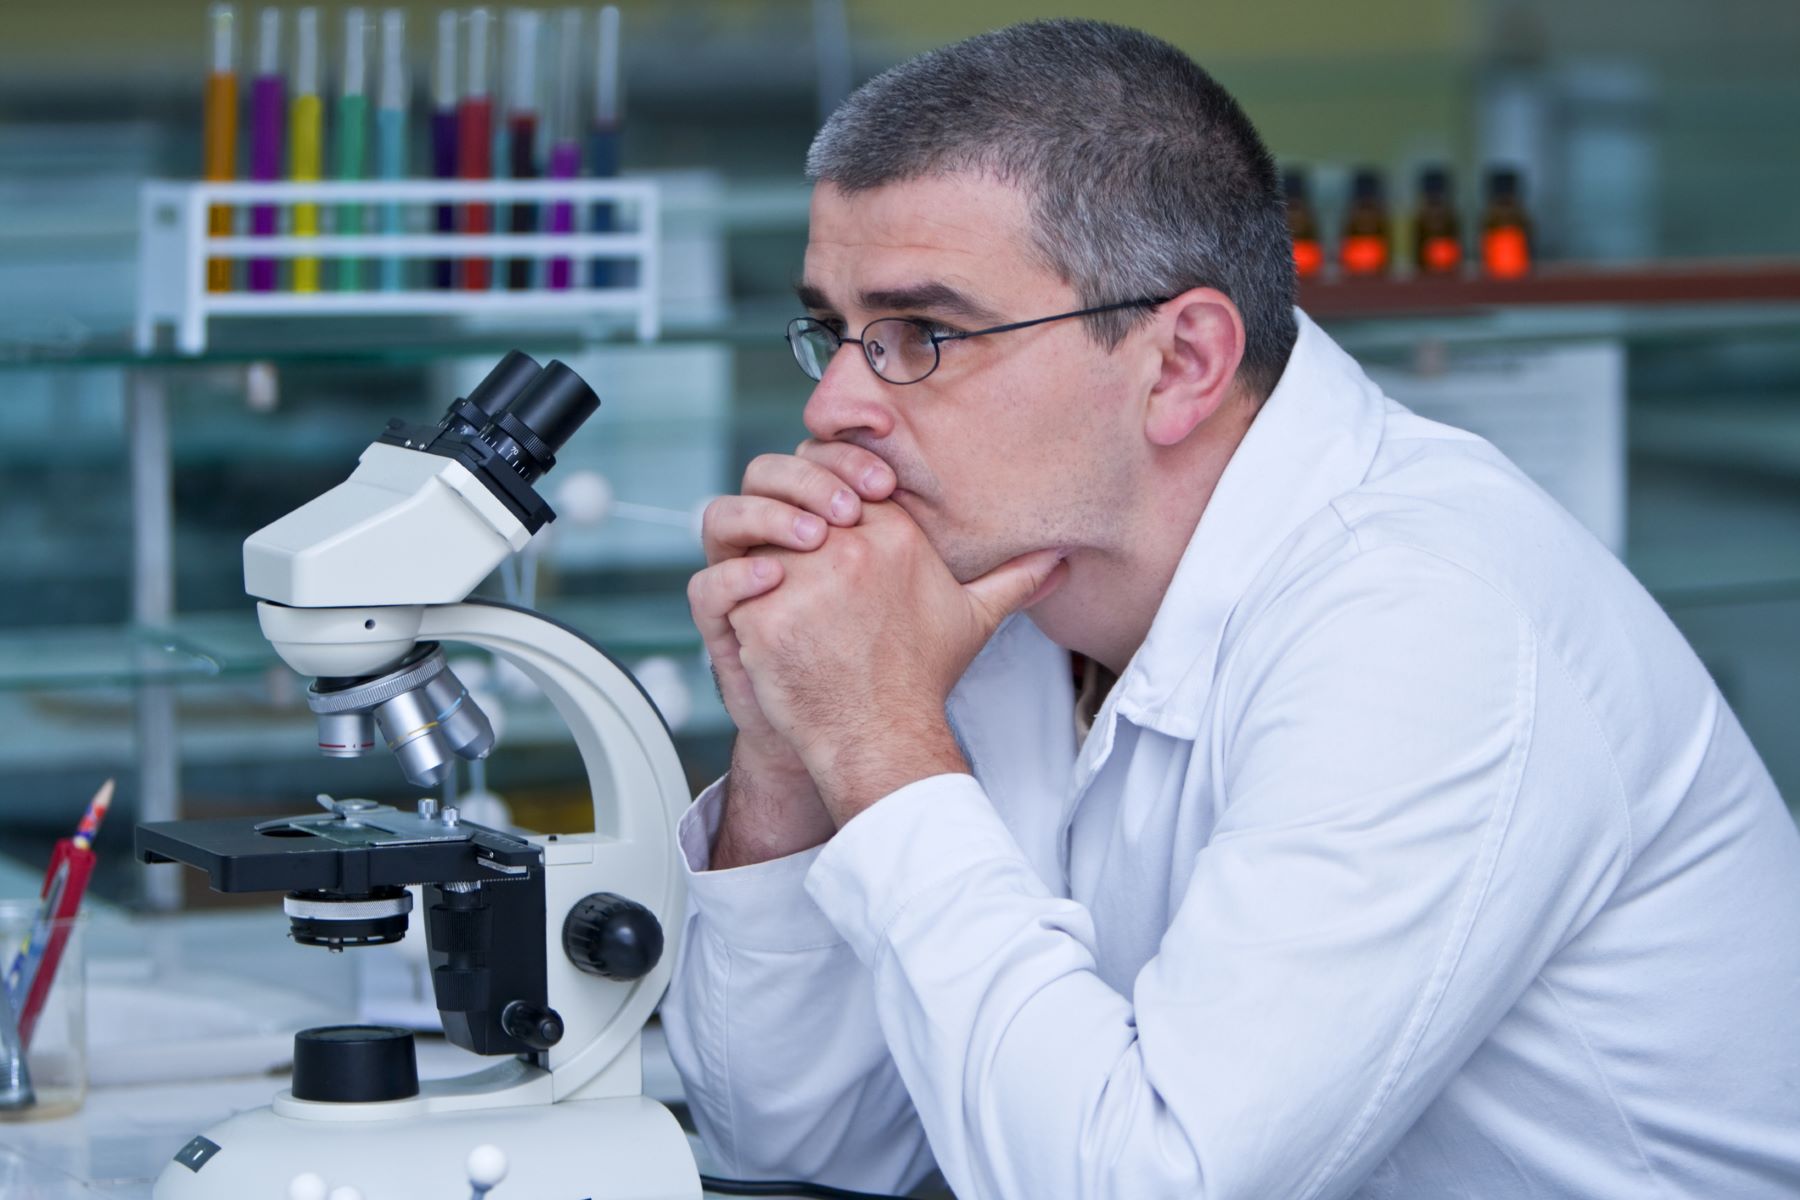 Scientist thinking about resolving hair cloning issues